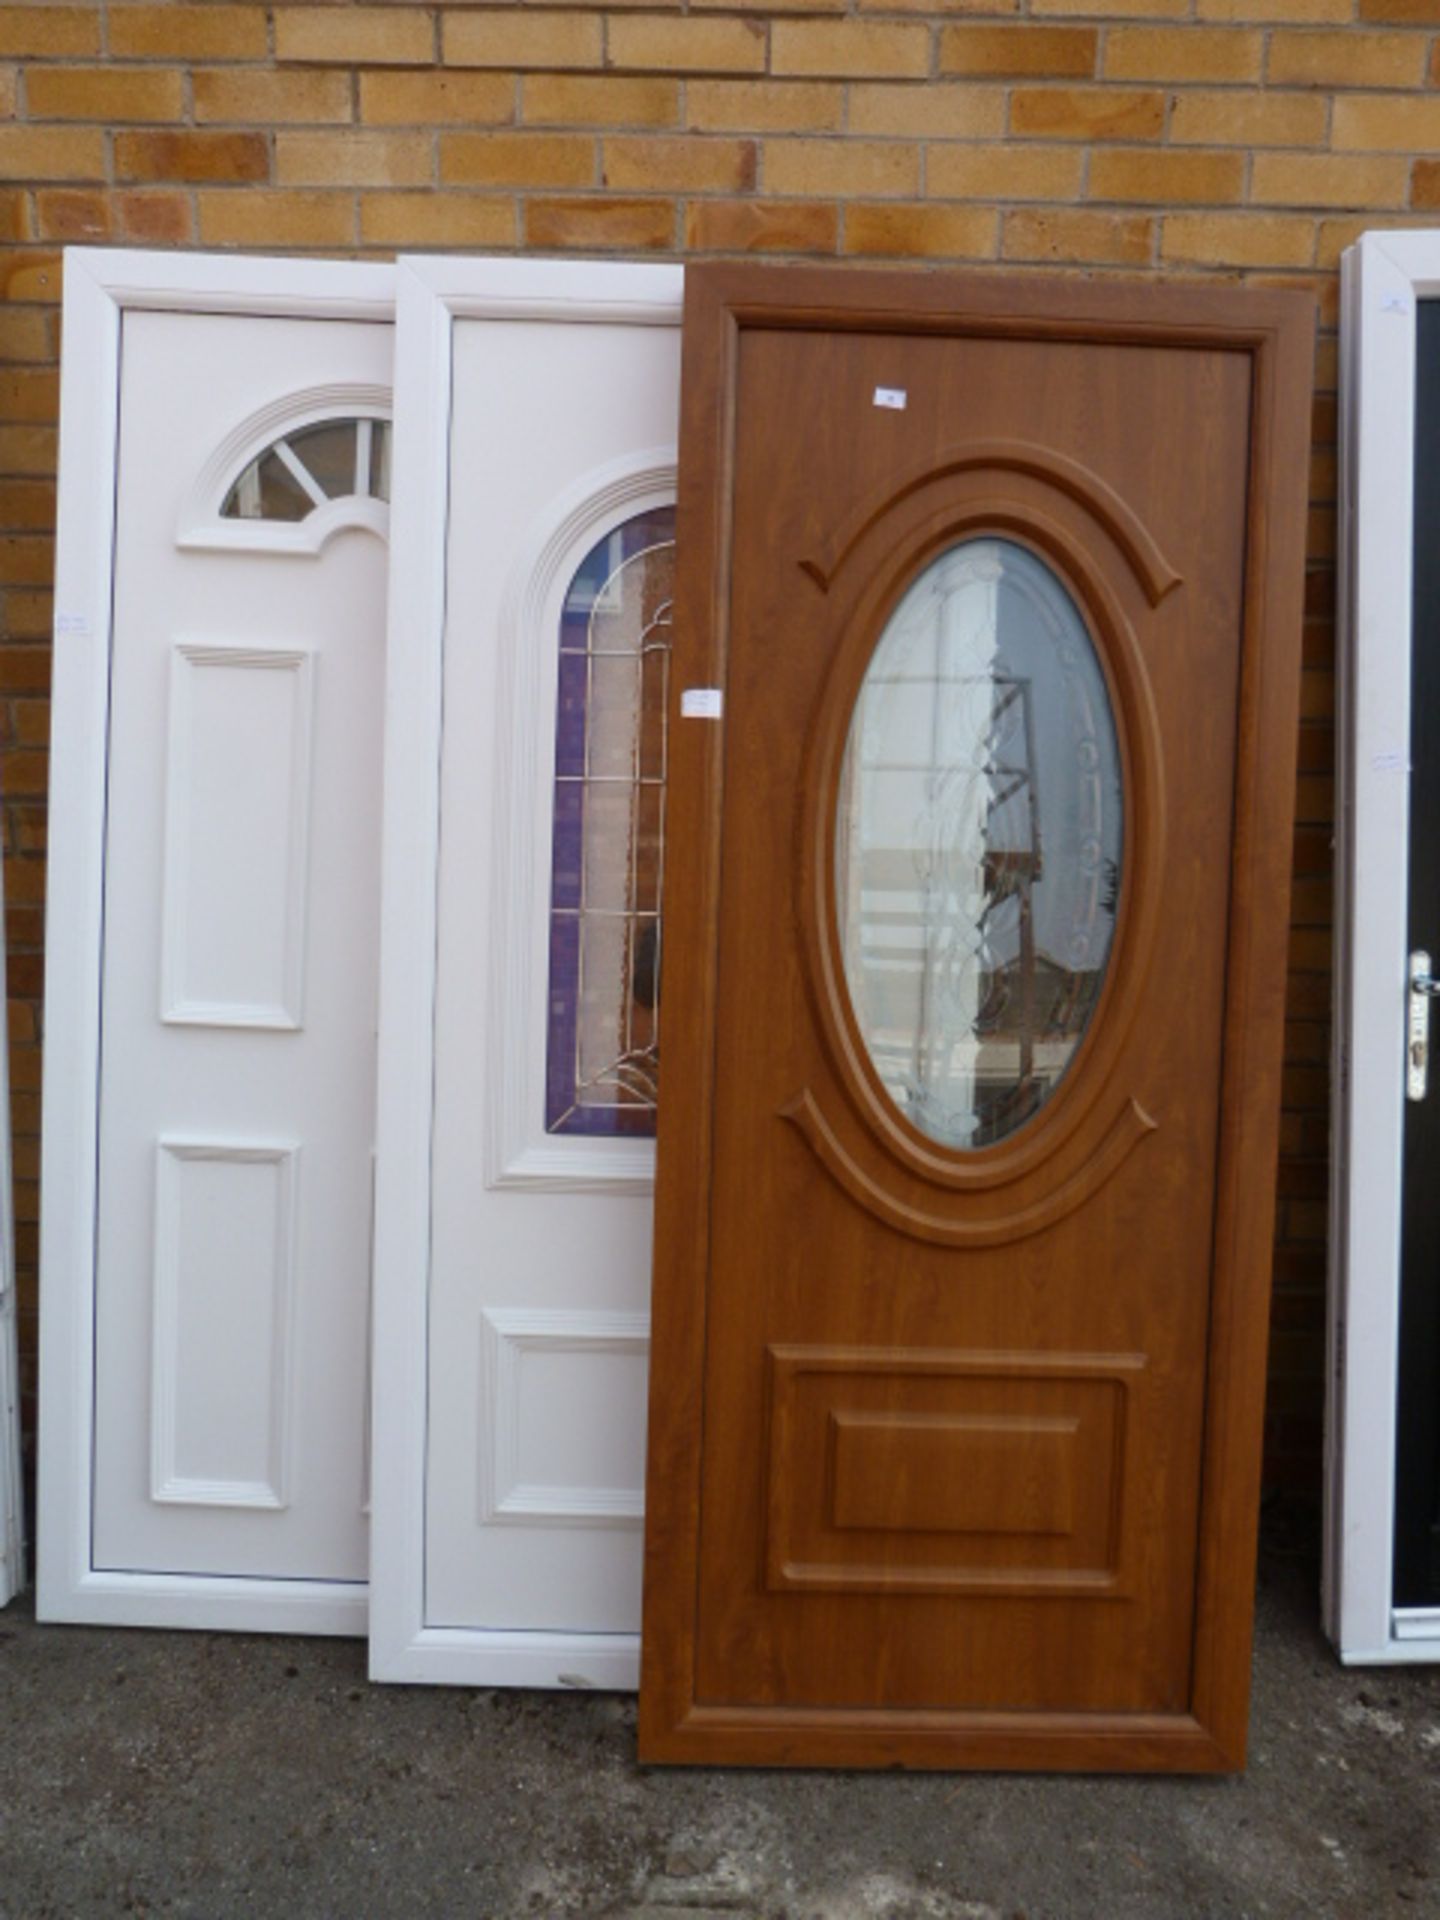 *4 UPVC Panels in assorted Finishes